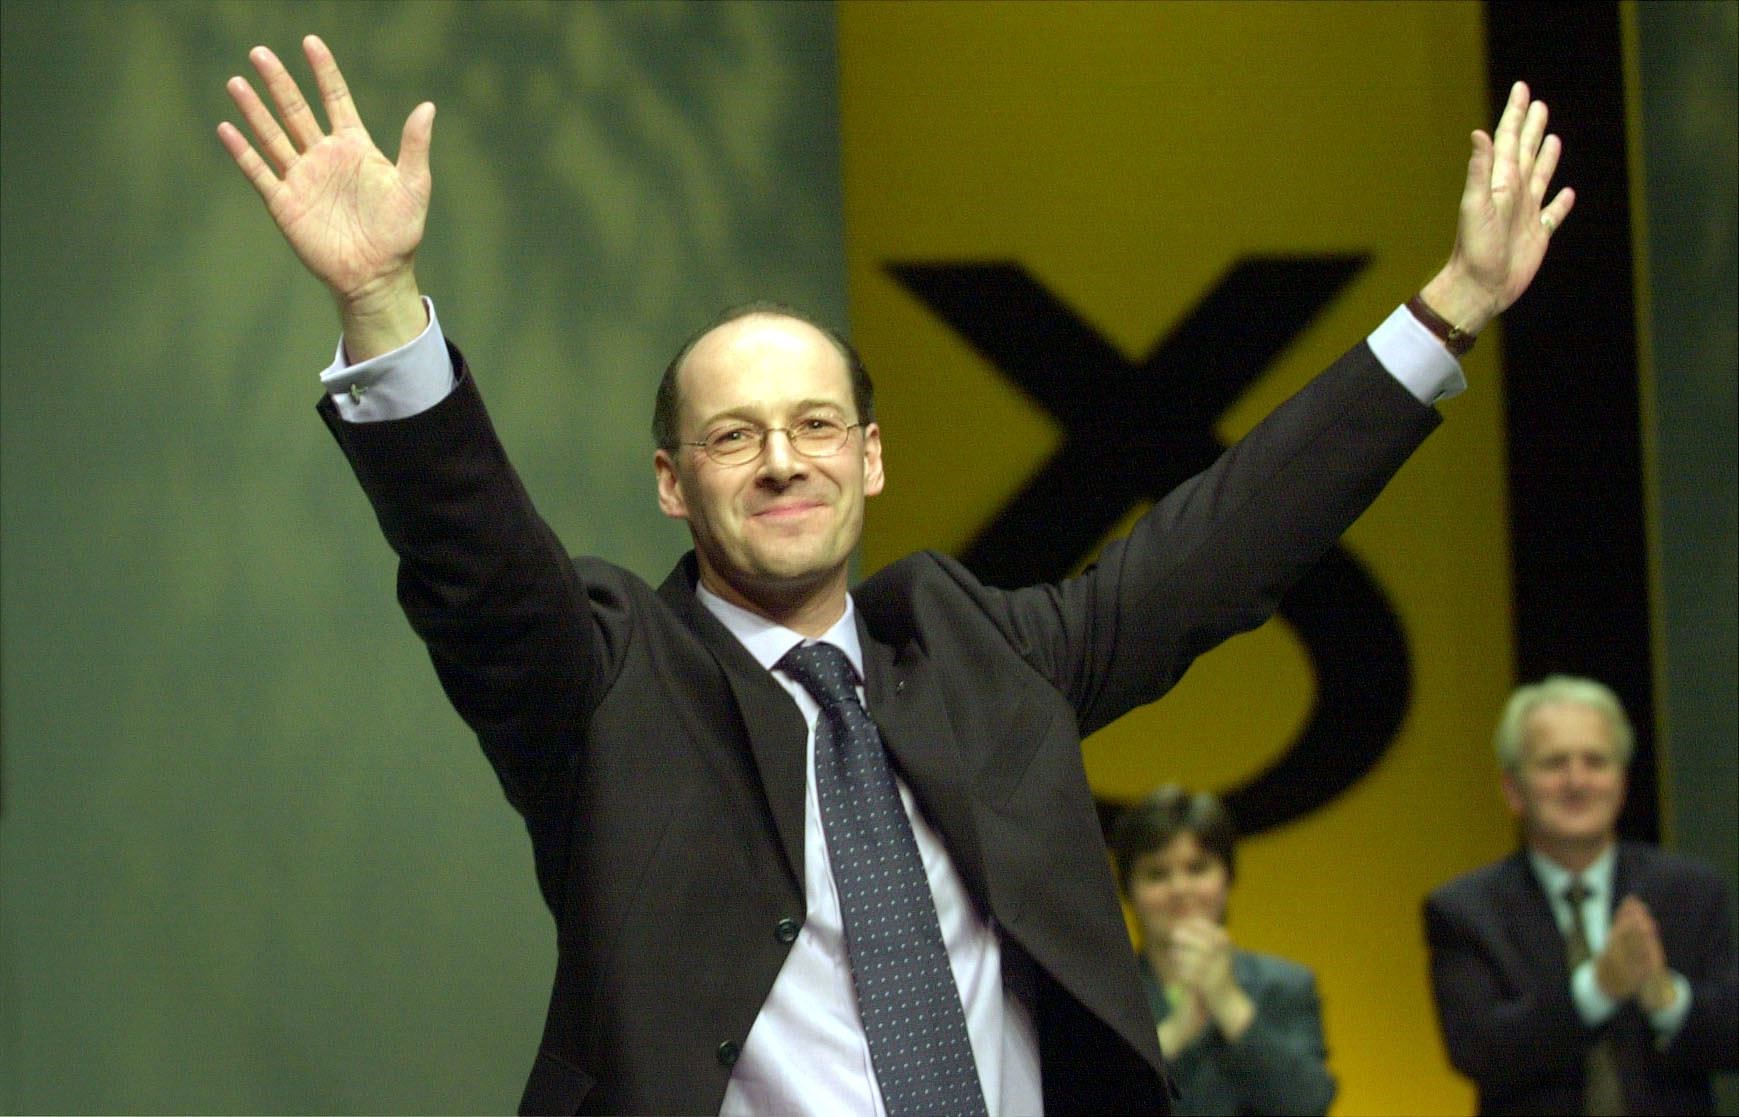 Mr Swinney celebrates after being elected SNP leader in 2000 (PA)